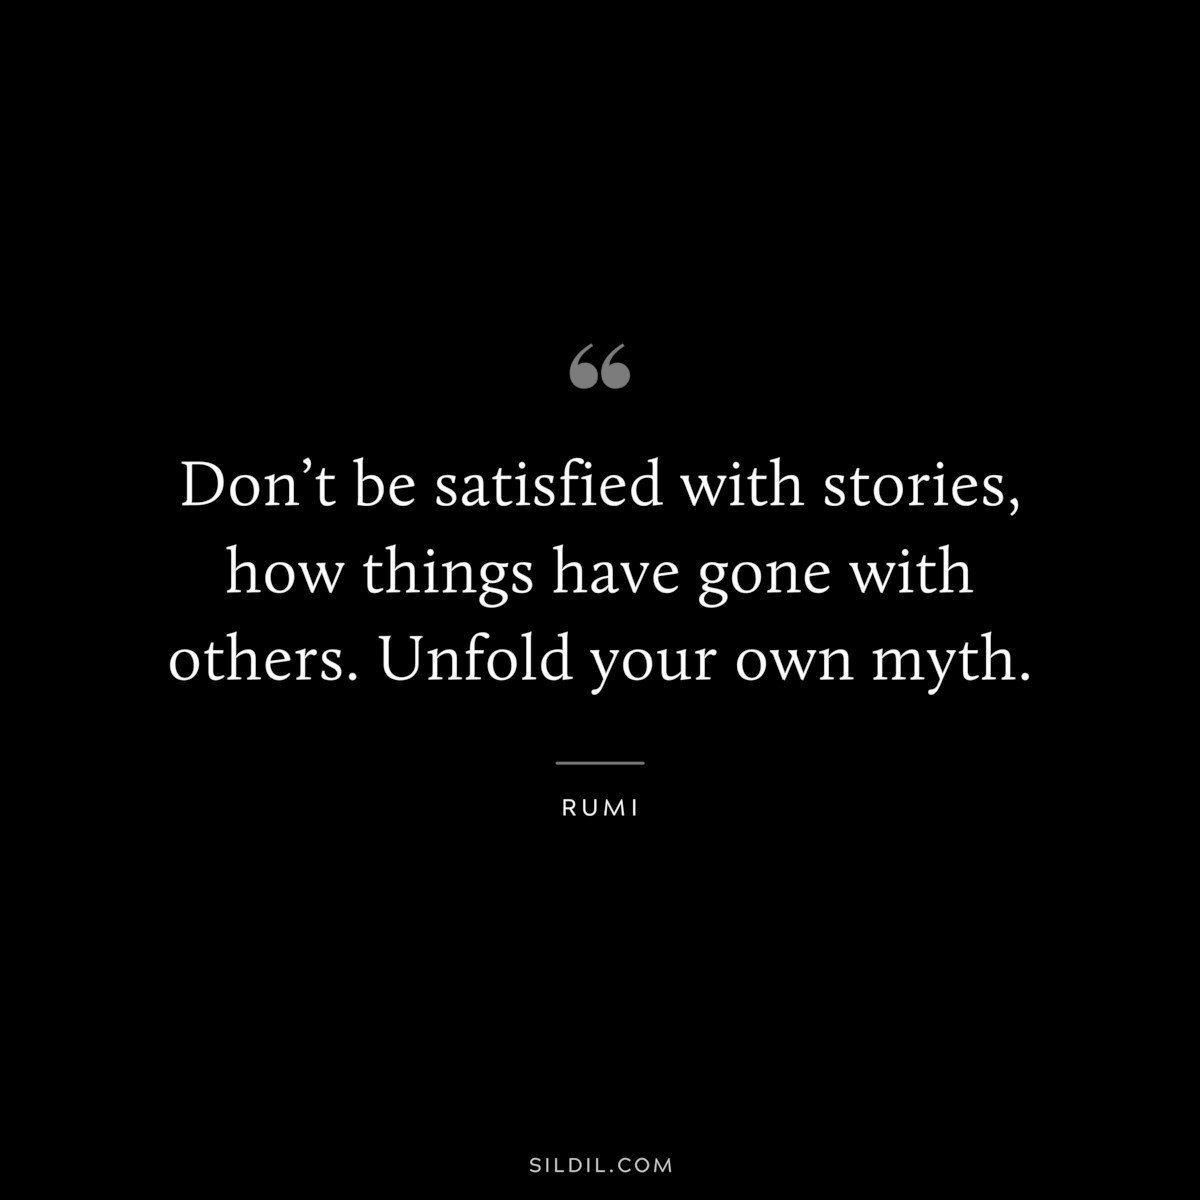 Don’t be satisfied with stories, how things have gone with others. Unfold your own myth. ― Rumi